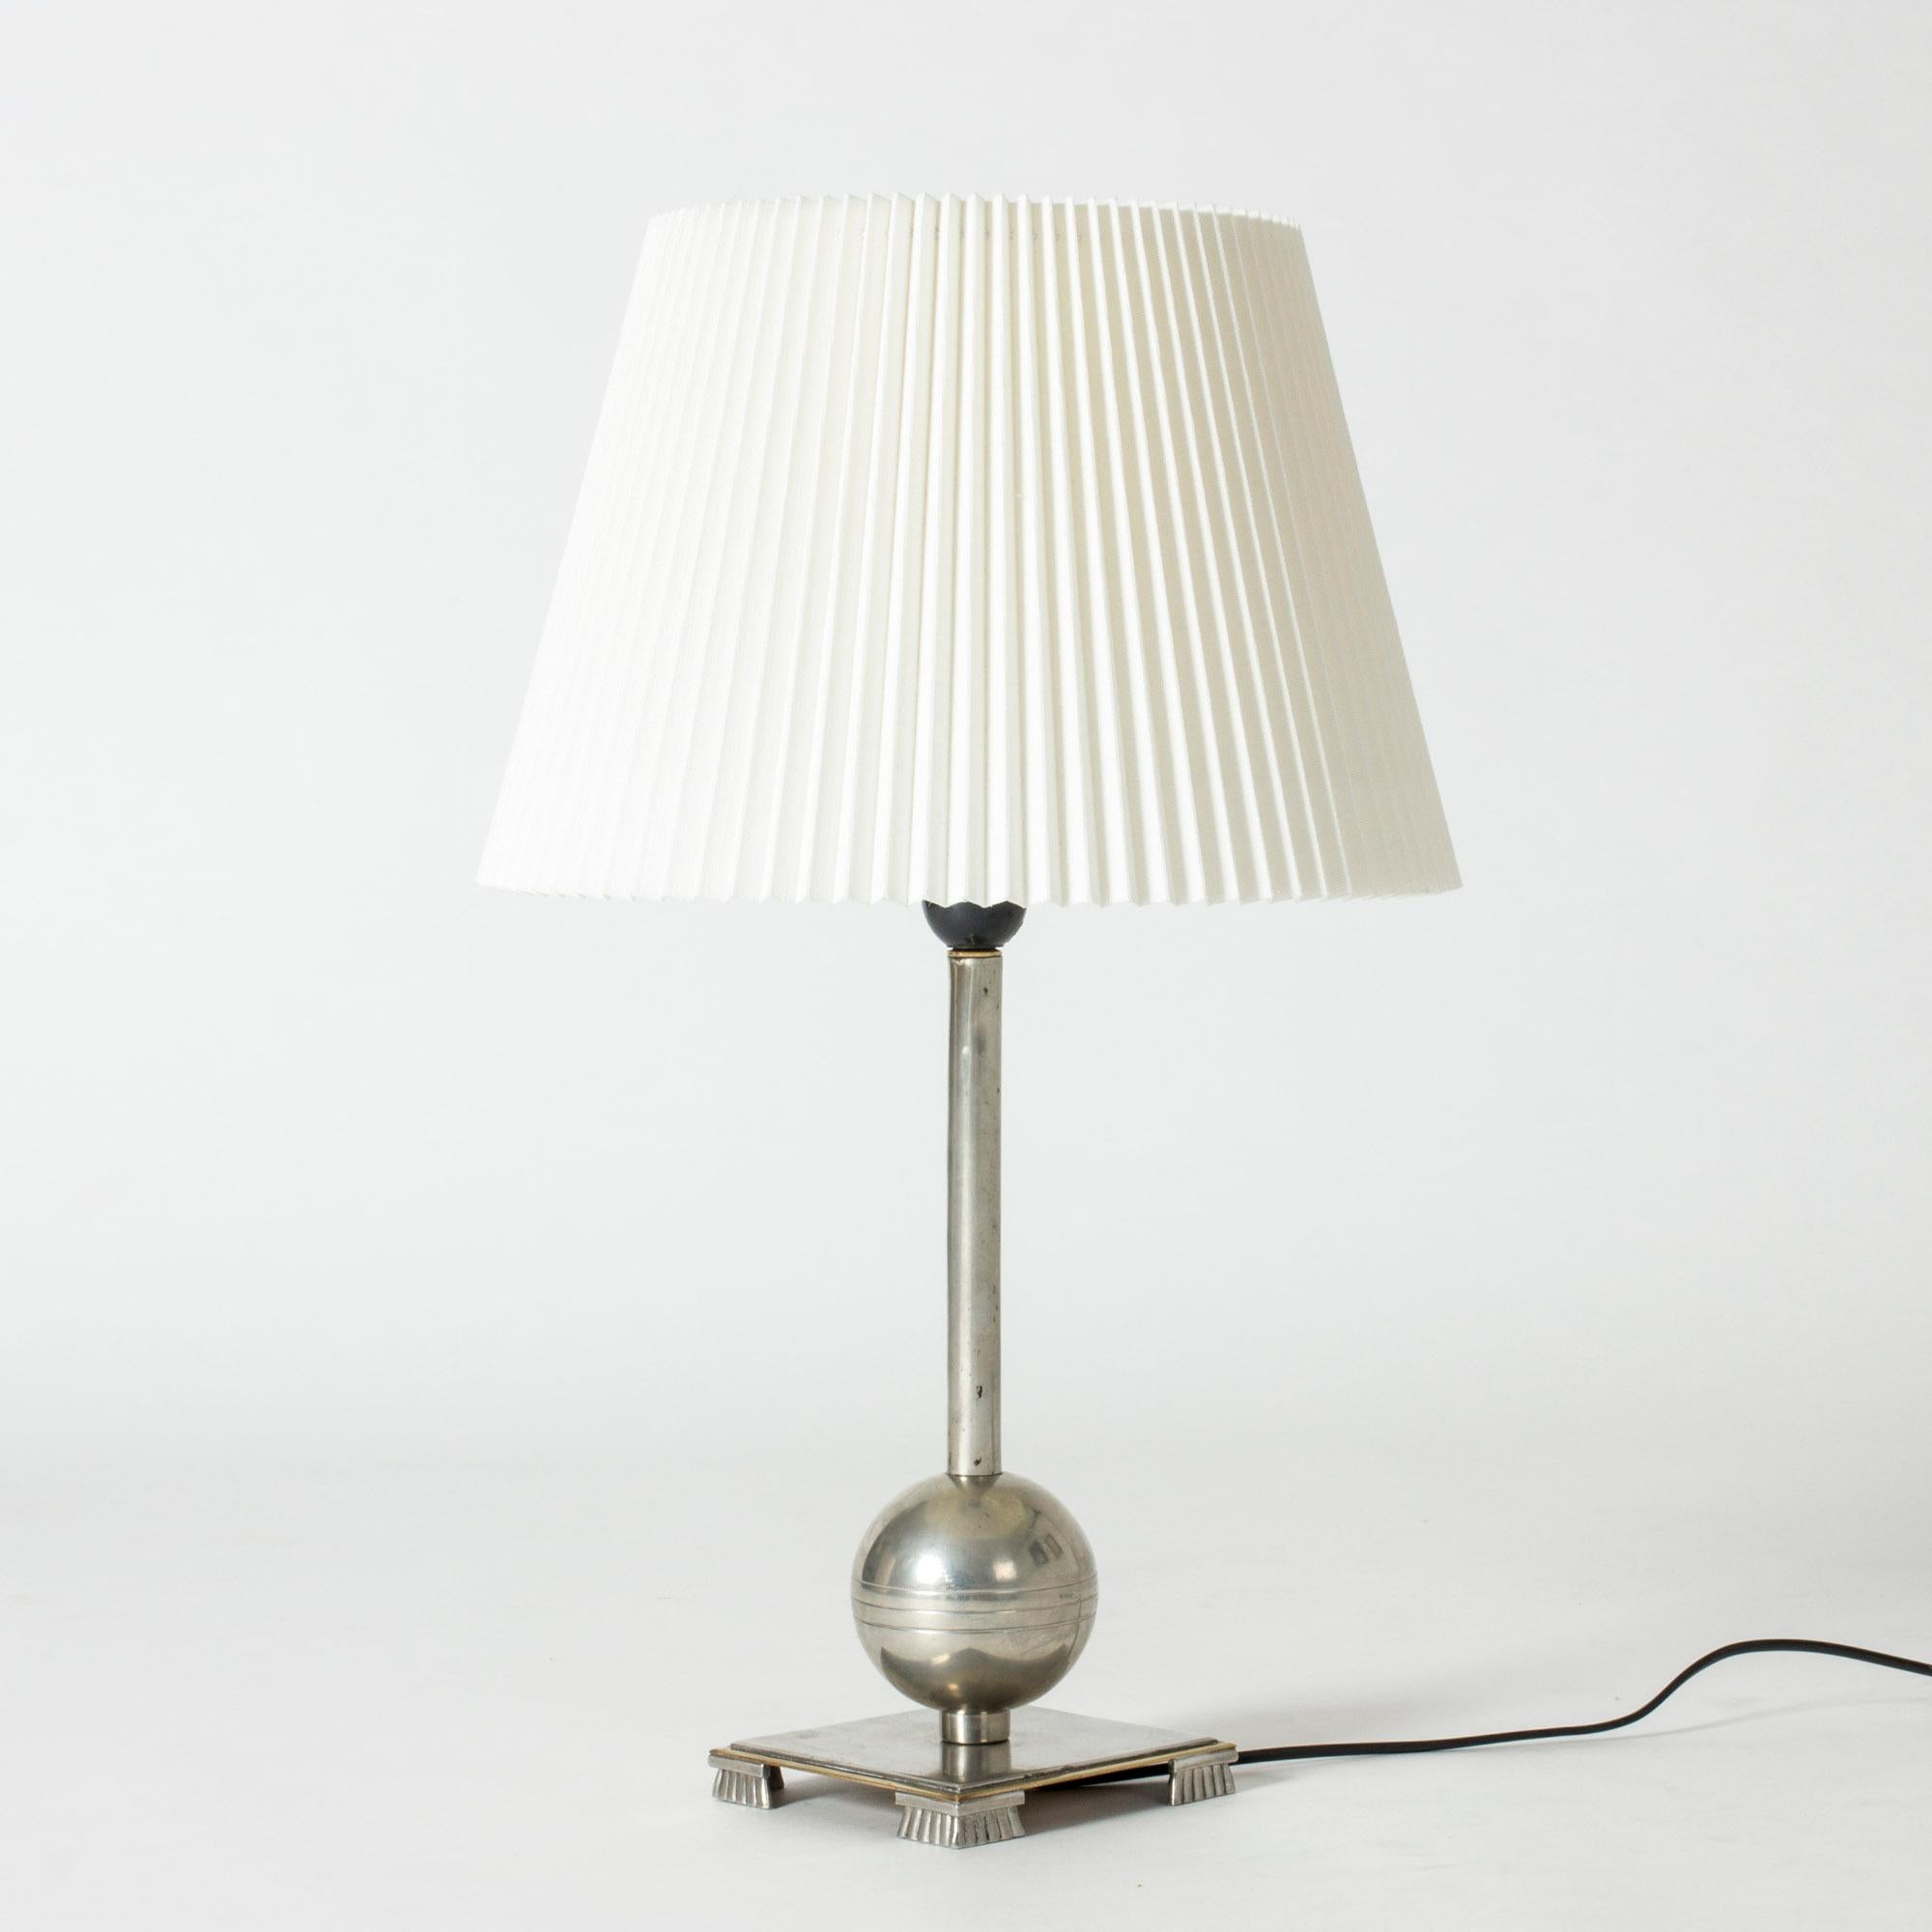 Elegant pewter table lamp by Einar Bäckström, in a functionalist design with a square base with decorative feet, and a globe on the handle.